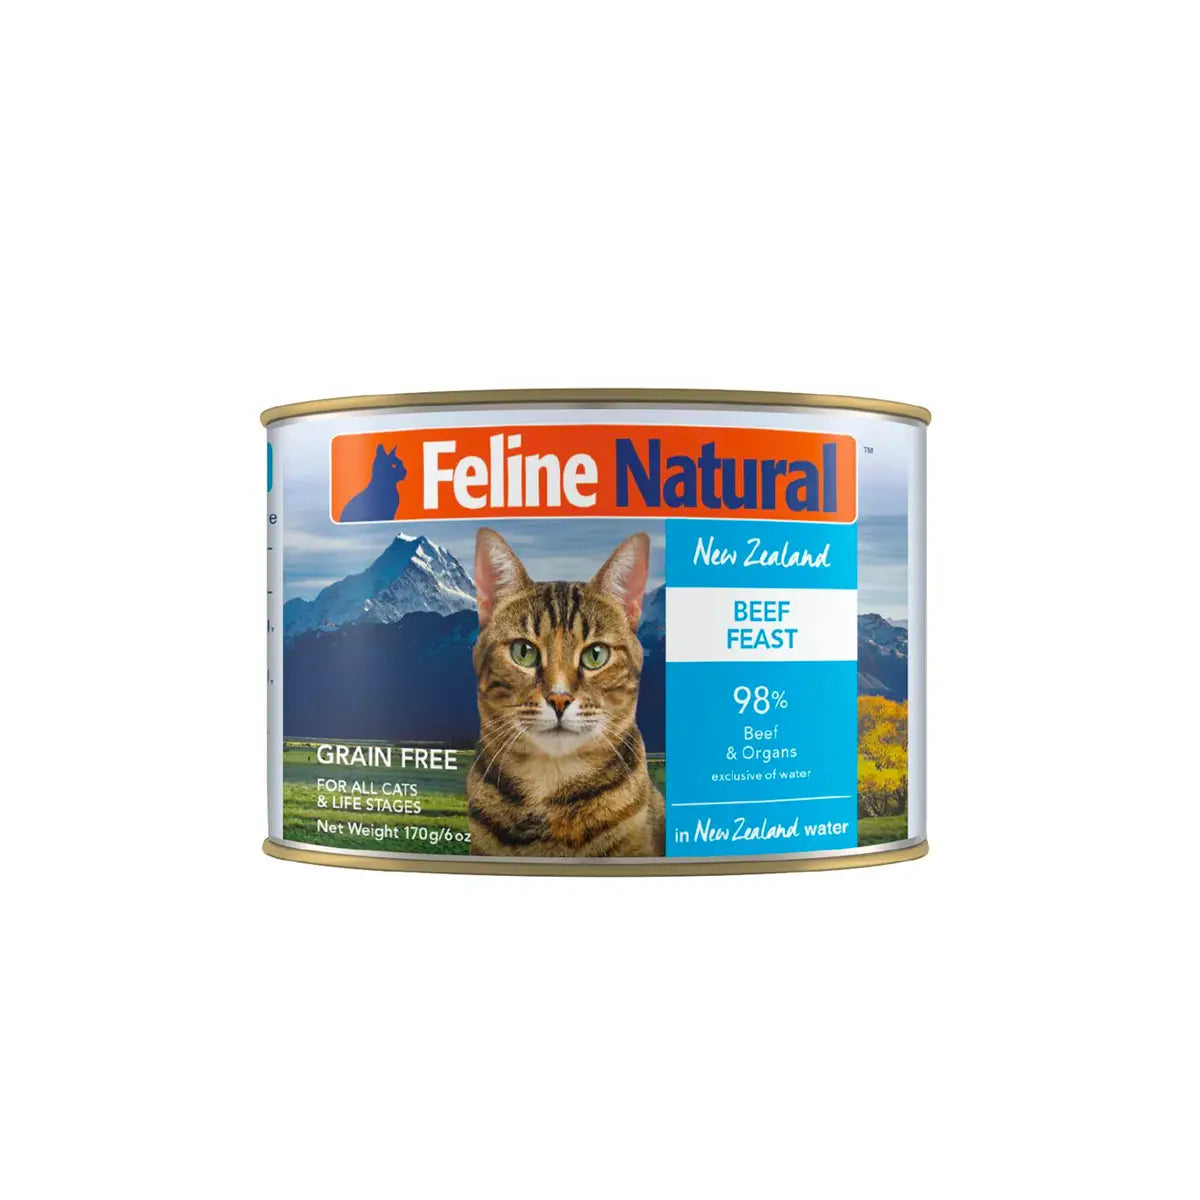 Feline Natural Canned Cat Food - Beef Feast 170g